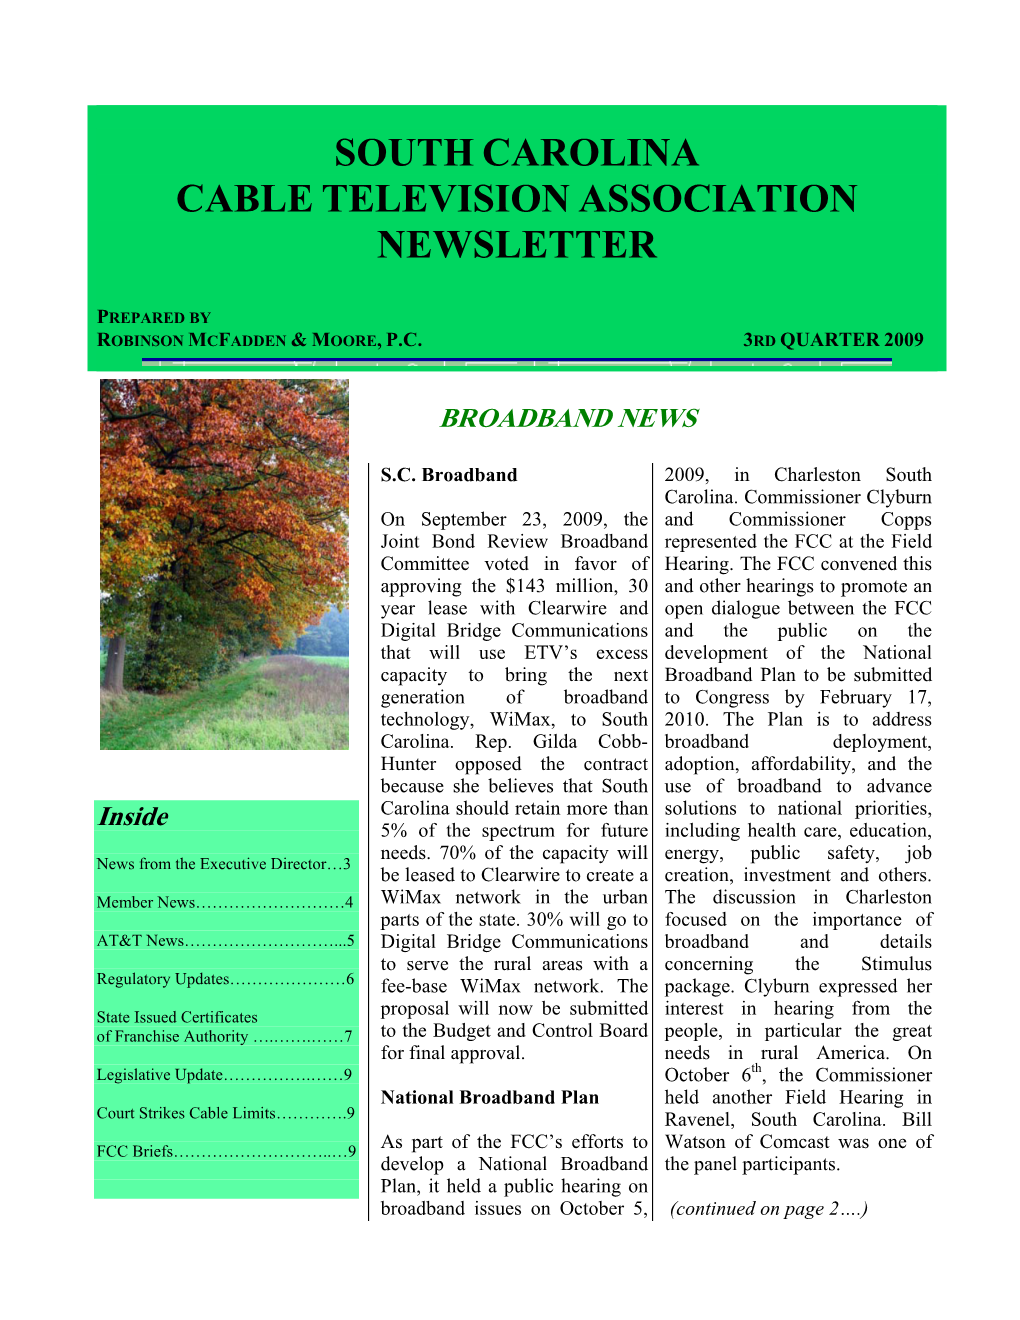 South Carolina Cable Television Association Newsletter